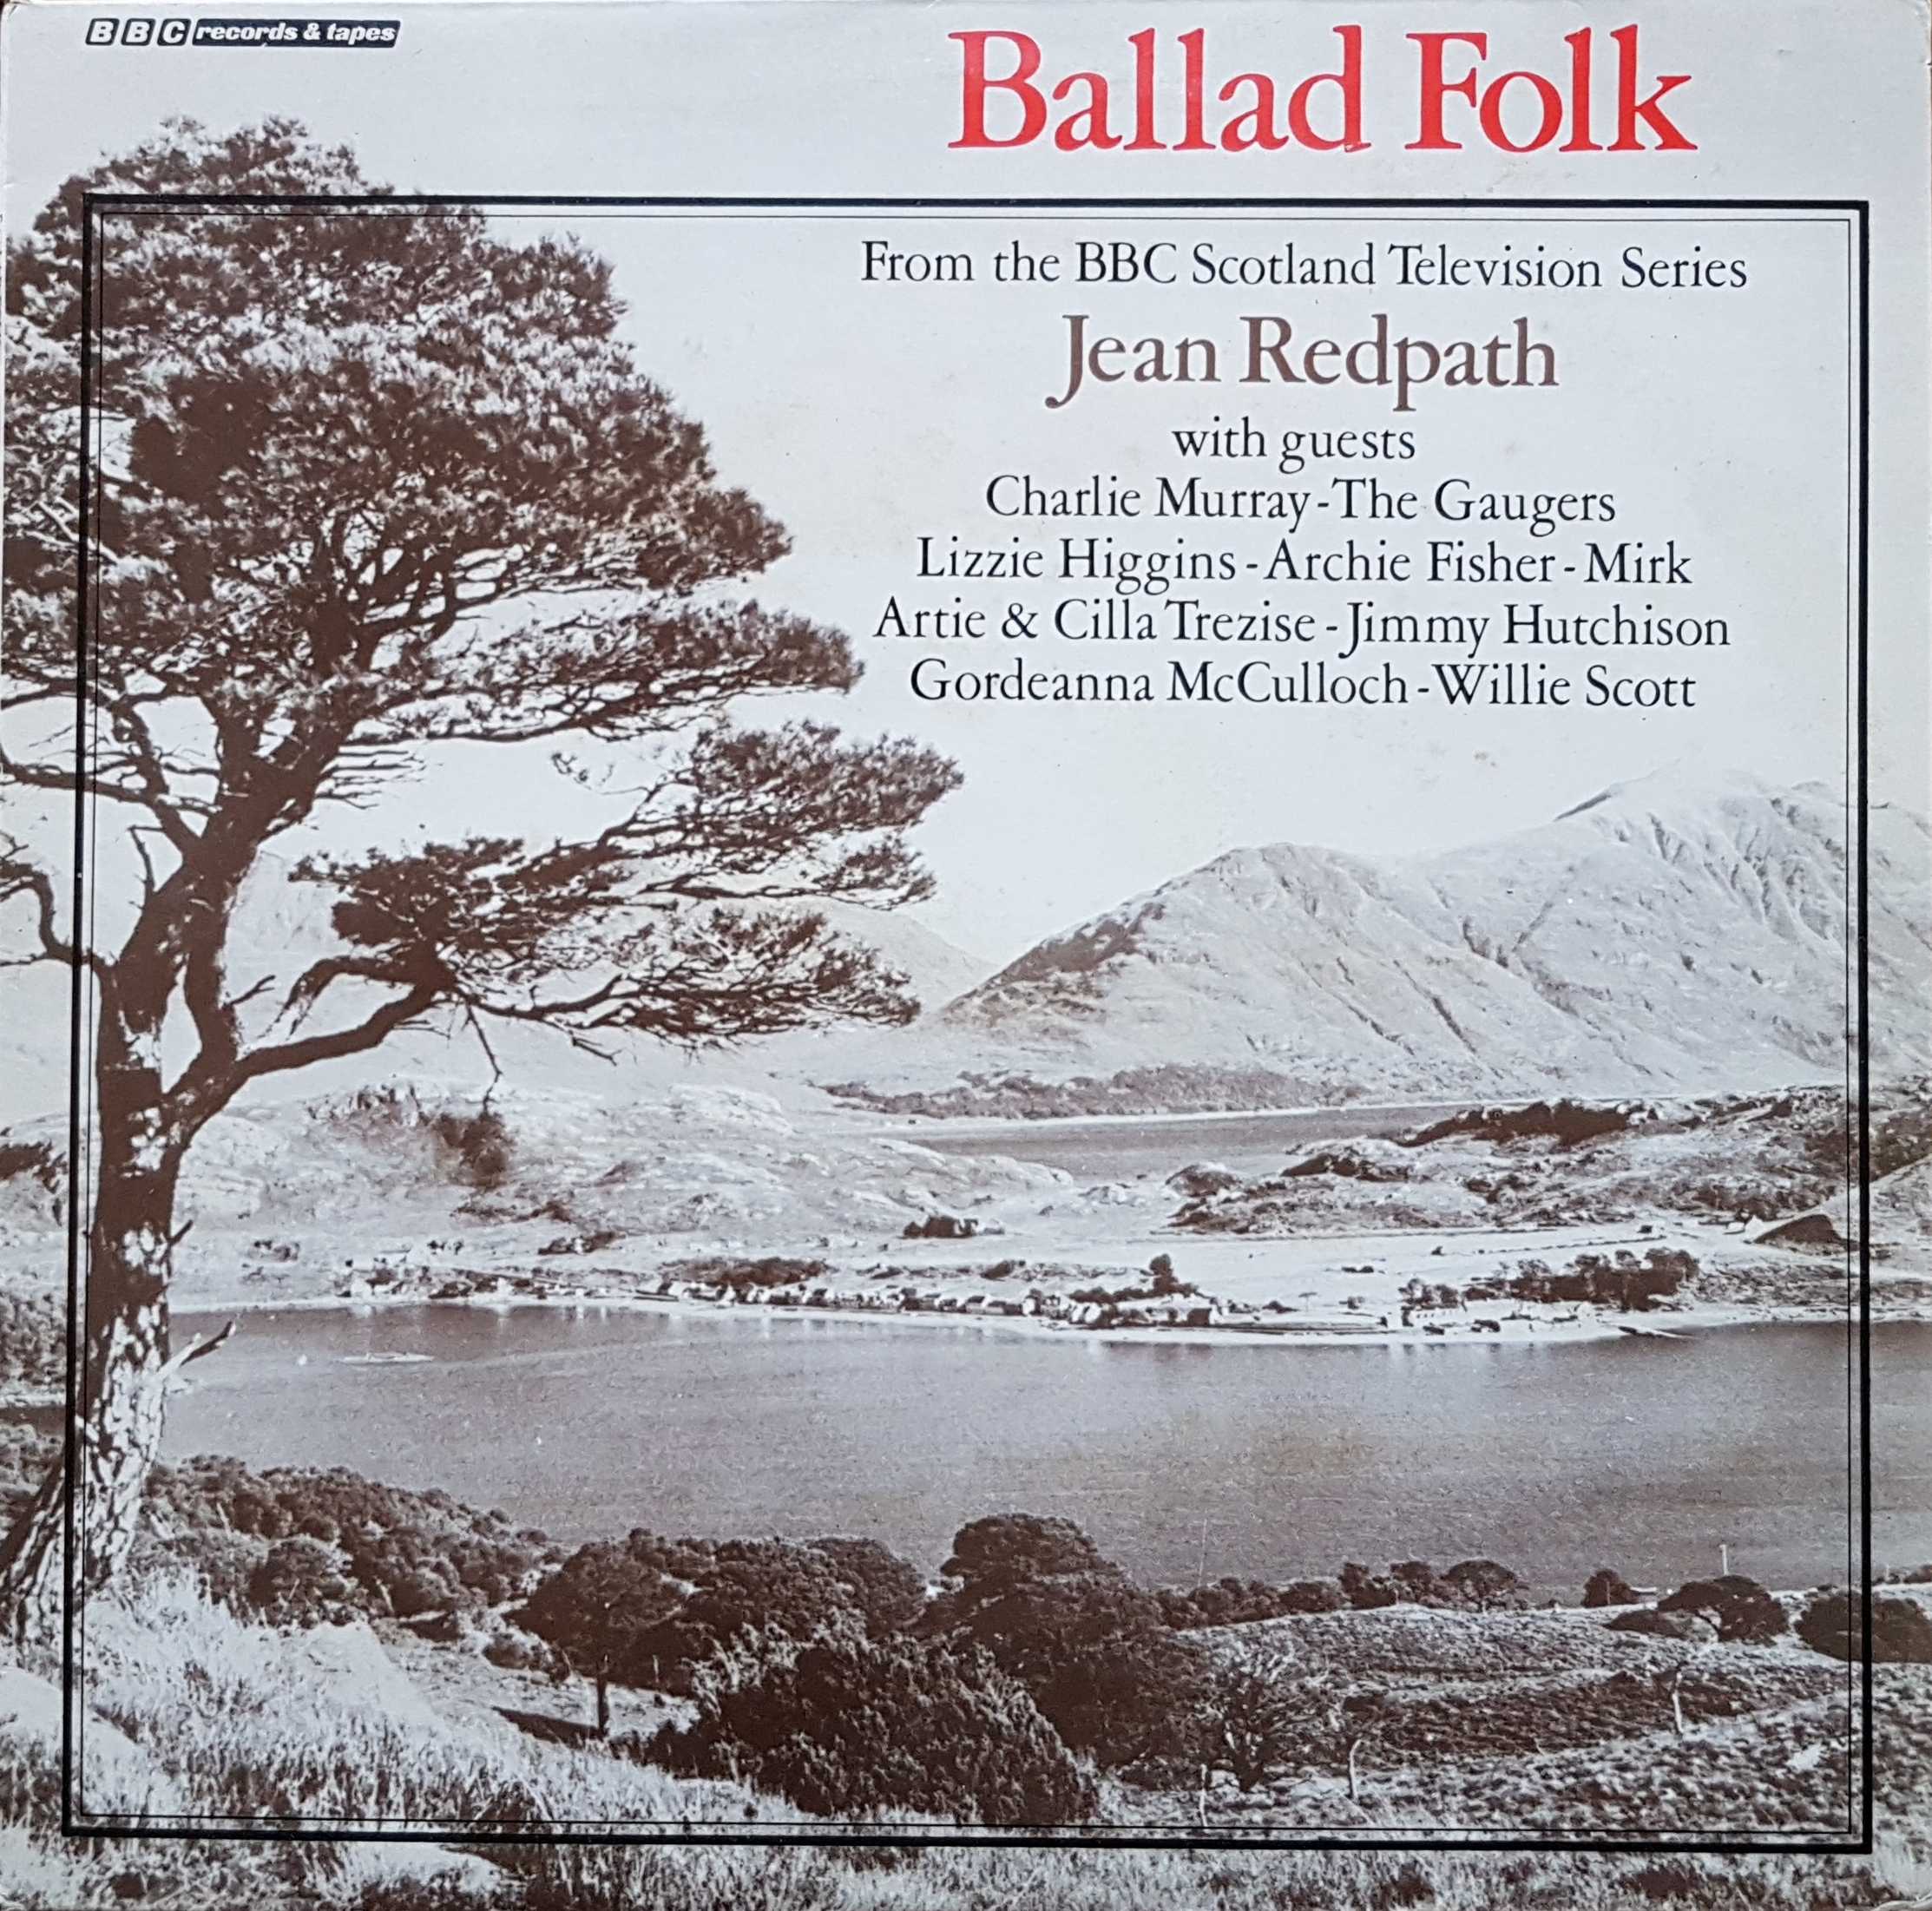 Picture of REC 293 Ballad folk album by artist Various from the BBC records and Tapes library